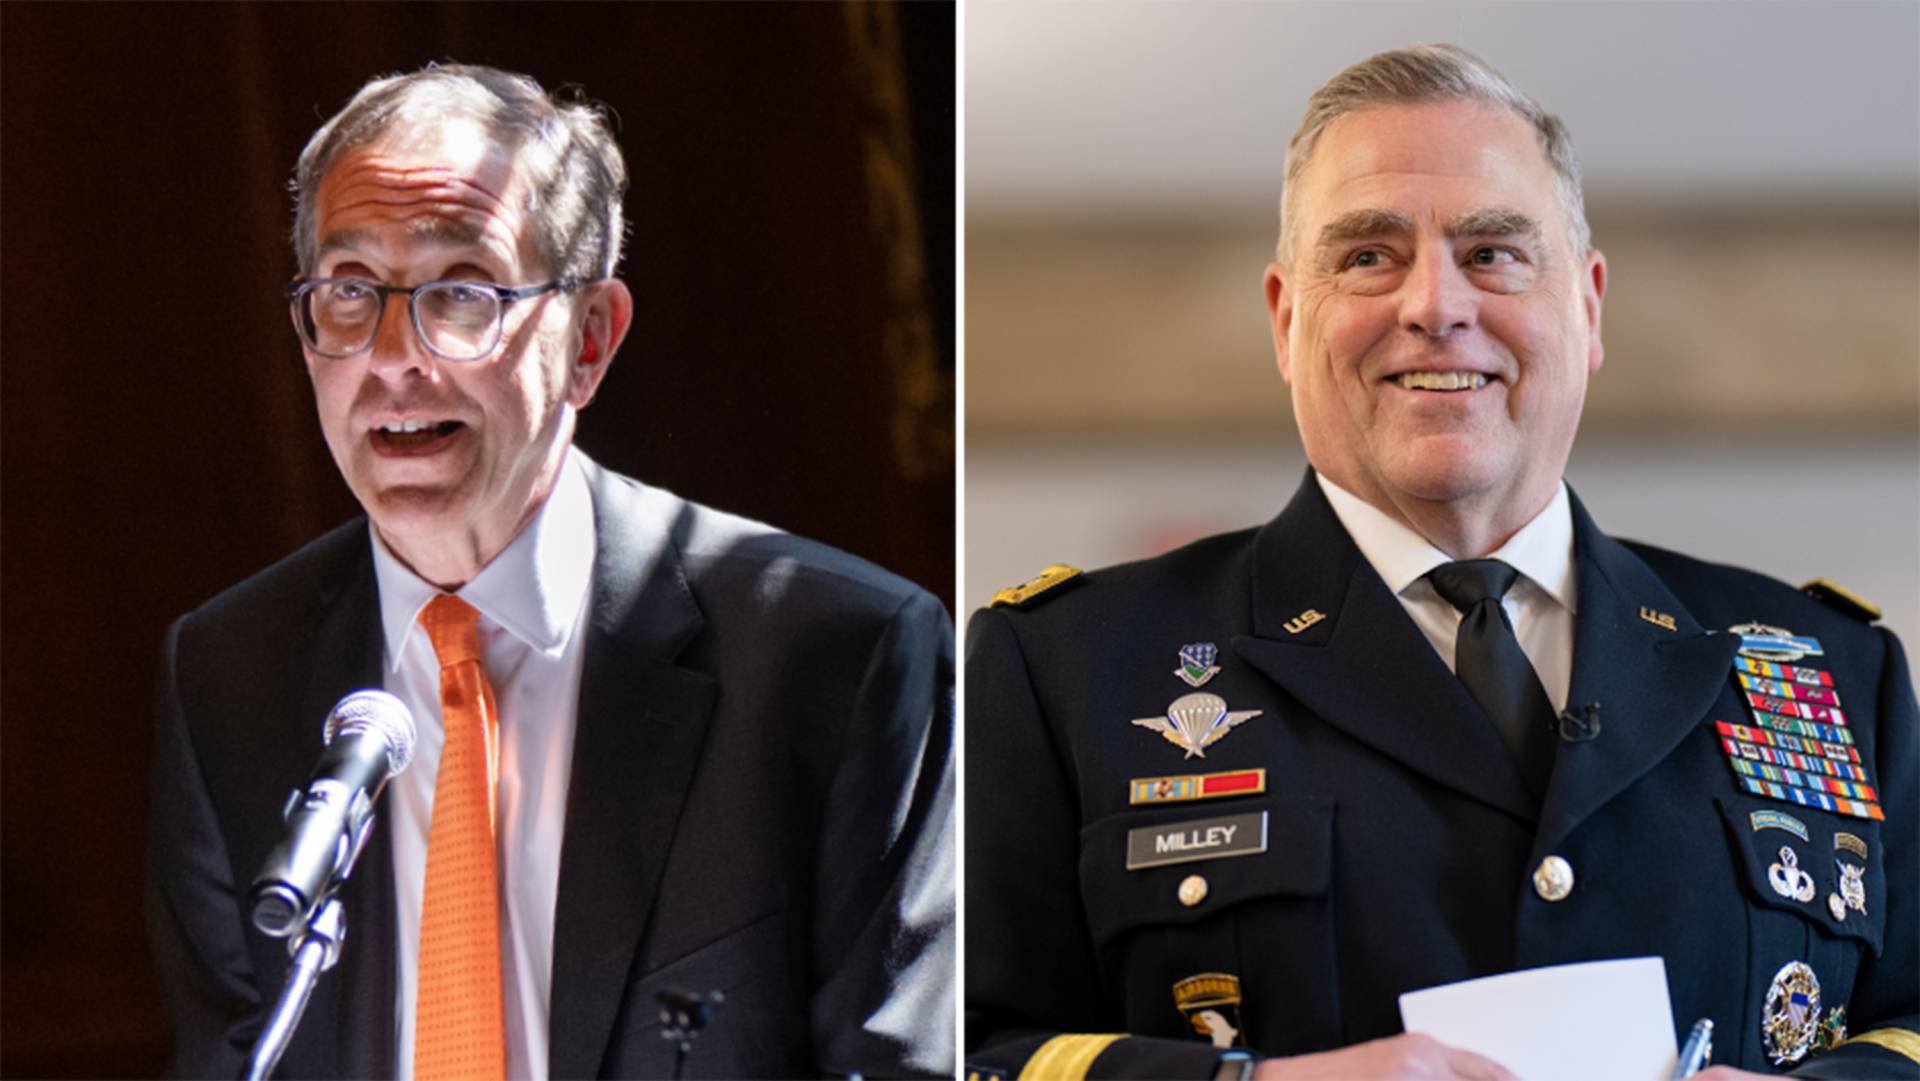 President Christopher L. Eisgruber and General Mark A. Milley